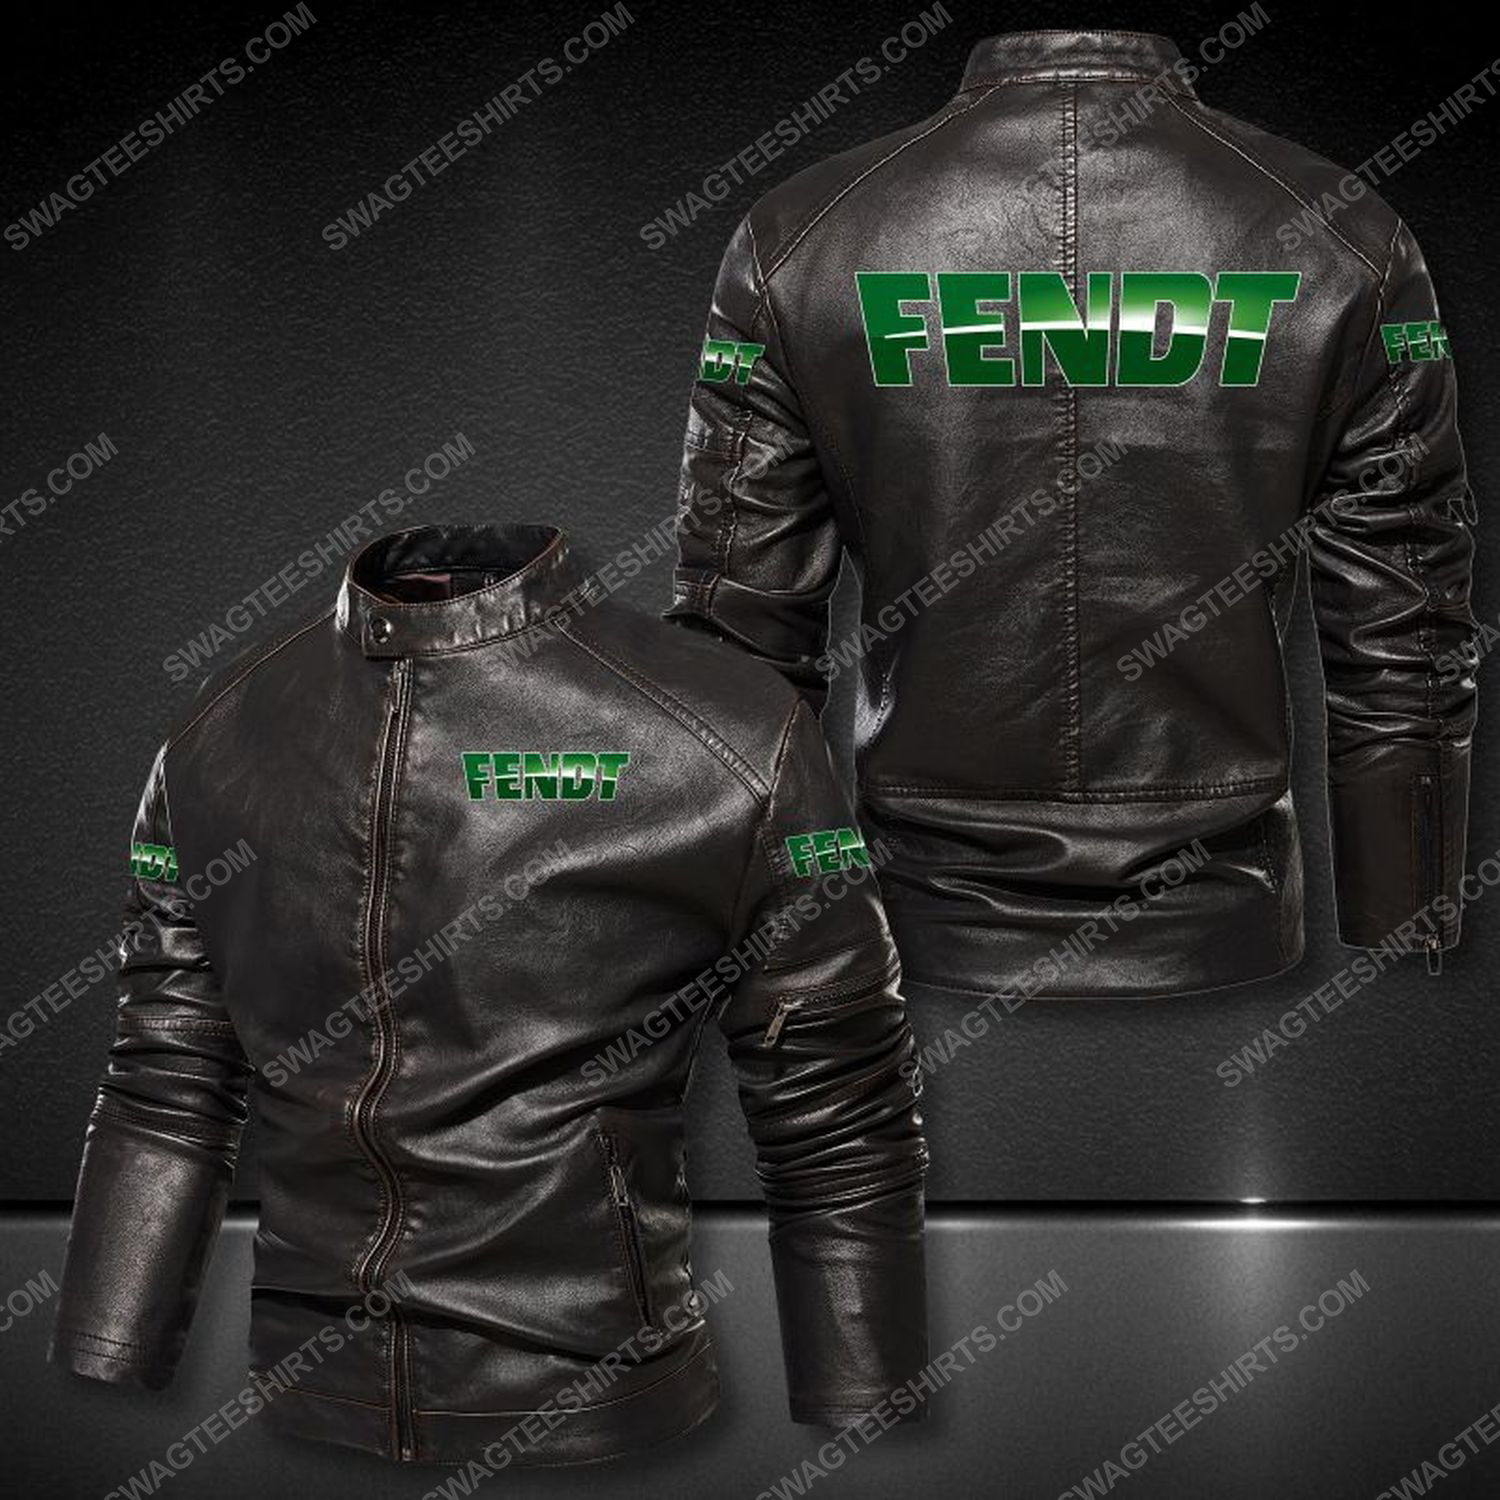 The fendt company sports leather jacket 1 - Copy